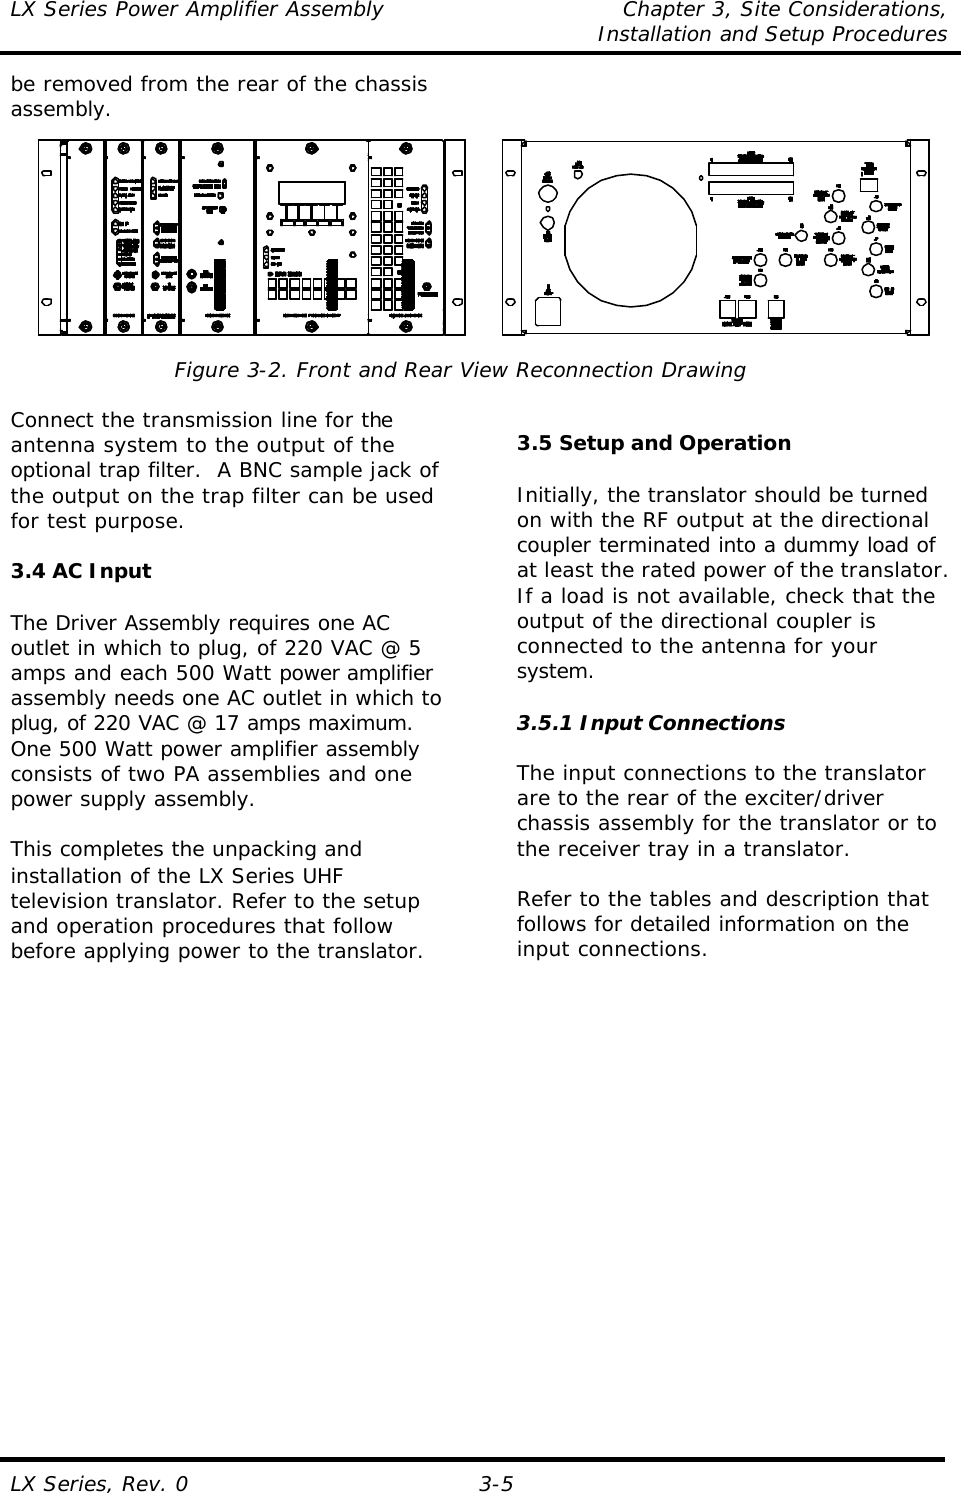 LX Series Power Amplifier Assembly Chapter 3, Site Considerations,   Installation and Setup Procedures LX Series, Rev. 0 3-5 be removed from the rear of the chassis assembly.   Figure 3-2. Front and Rear View Reconnection Drawing  Connect the transmission line for the antenna system to the output of the optional trap filter.  A BNC sample jack of the output on the trap filter can be used for test purpose.  3.4 AC Input  The Driver Assembly requires one AC outlet in which to plug, of 220 VAC @ 5 amps and each 500 Watt power amplifier assembly needs one AC outlet in which to plug, of 220 VAC @ 17 amps maximum.  One 500 Watt power amplifier assembly consists of two PA assemblies and one power supply assembly.  This completes the unpacking and installation of the LX Series UHF television translator. Refer to the setup and operation procedures that follow before applying power to the translator.     3.5 Setup and Operation  Initially, the translator should be turned on with the RF output at the directional coupler terminated into a dummy load of at least the rated power of the translator.  If a load is not available, check that the output of the directional coupler is connected to the antenna for your system.  3.5.1 Input Connections  The input connections to the translator are to the rear of the exciter/driver chassis assembly for the translator or to the receiver tray in a translator.  Refer to the tables and description that follows for detailed information on the input connections.  